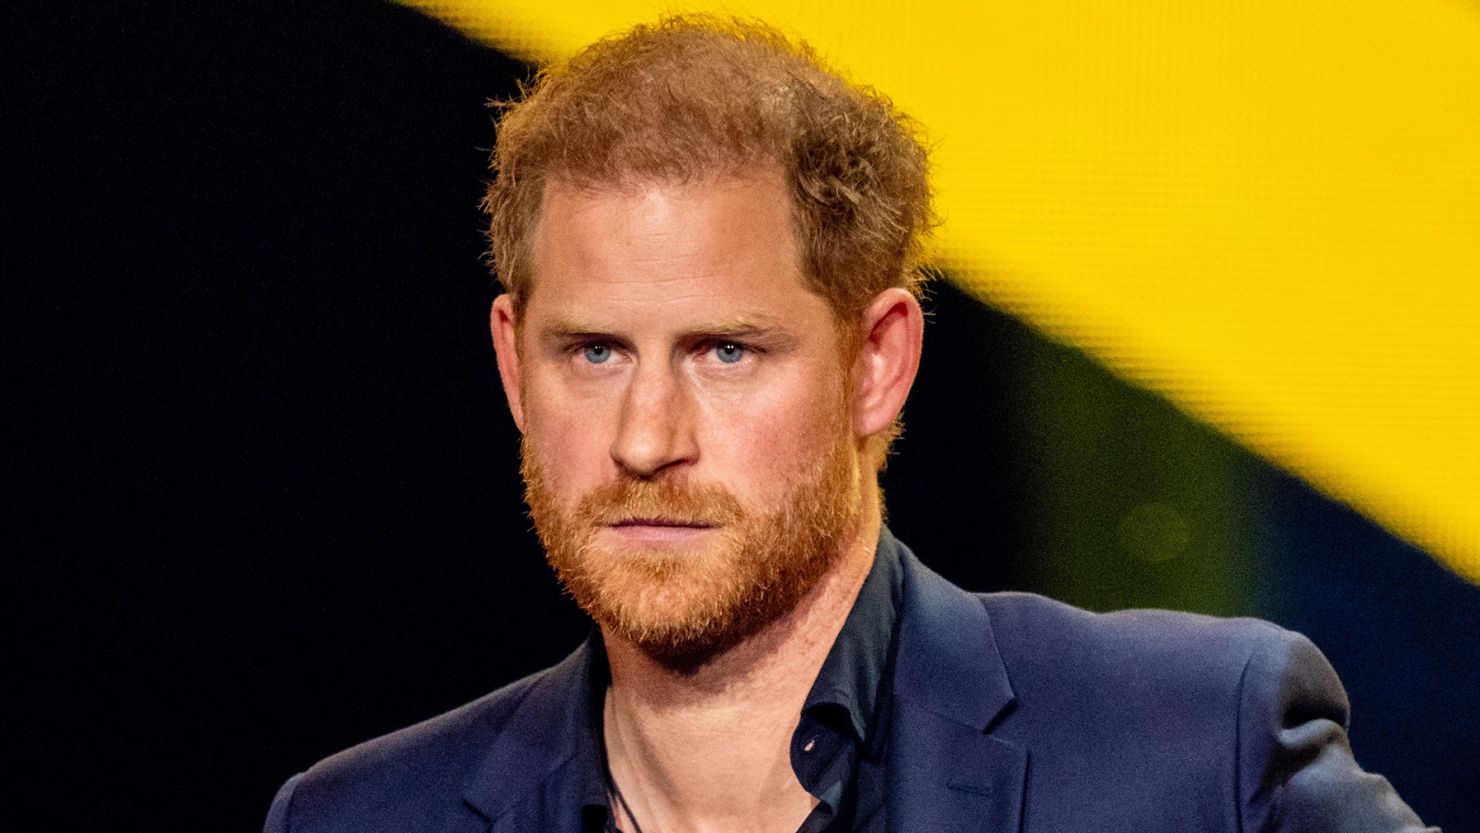 Prince Harry has returned to the UK to be with King Charles in a rare moment for the UK amid family rifts.